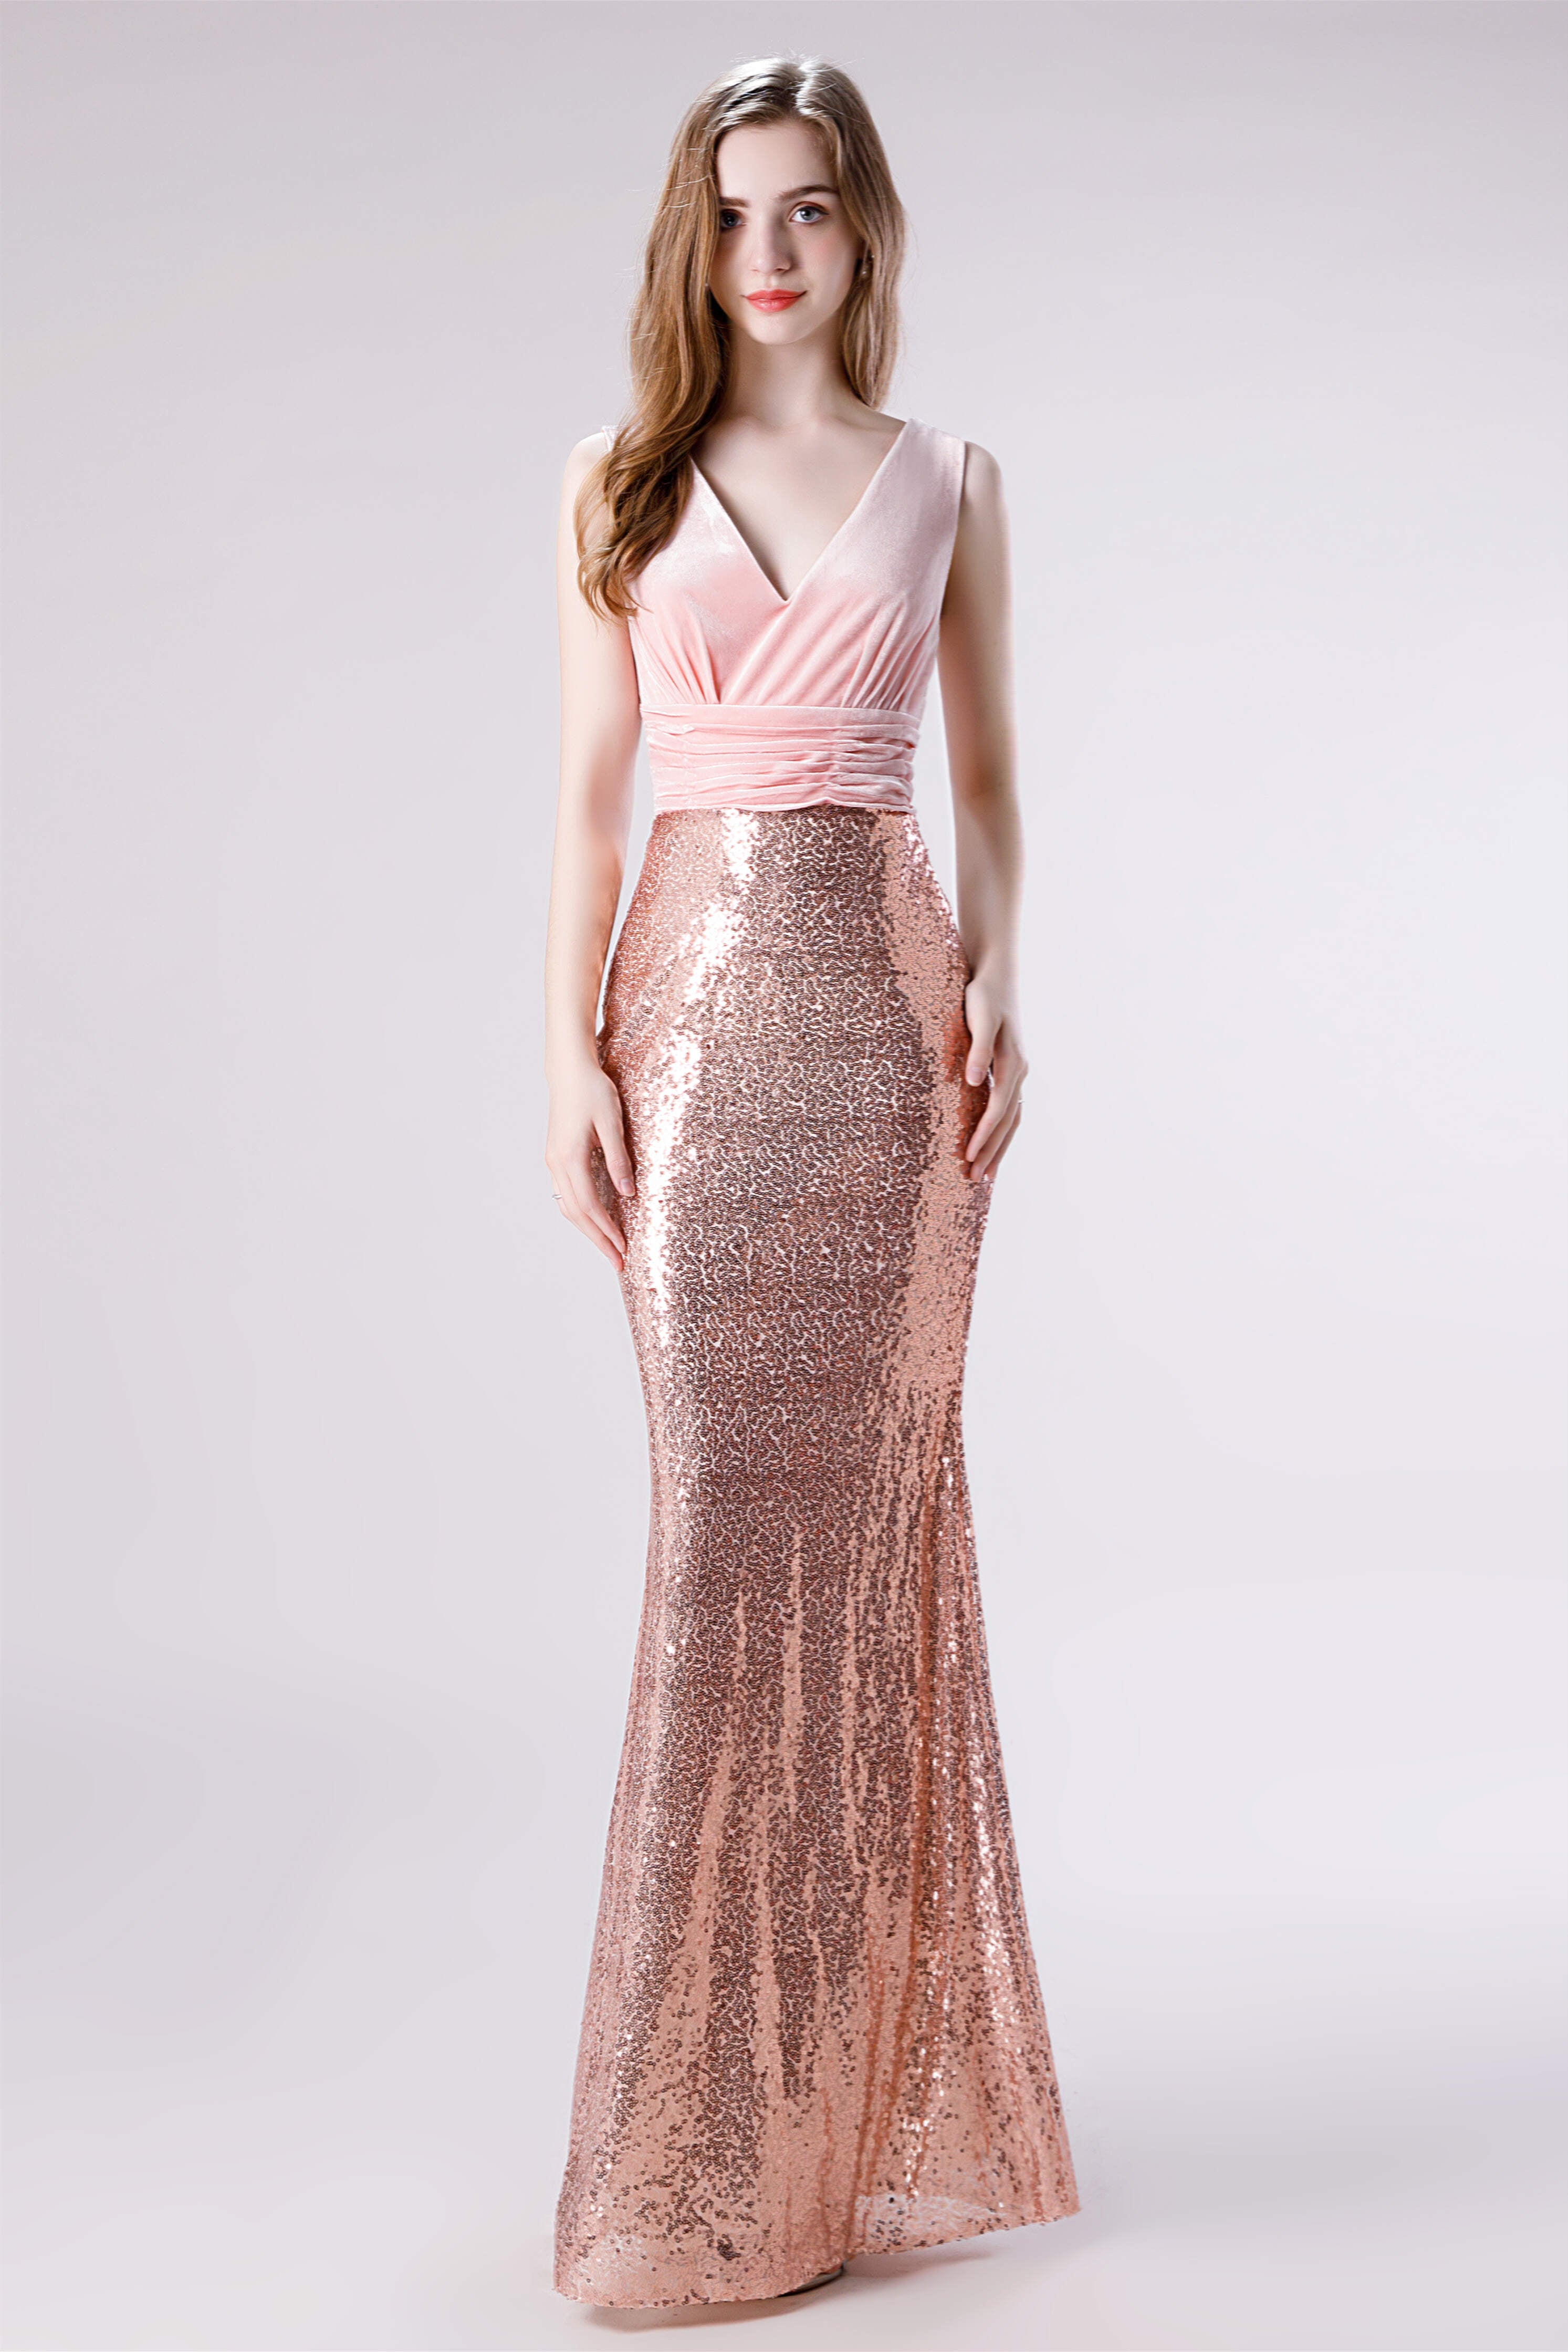 Pink Shimmery Sequin Lace Corset Prom Dresses outfit, Homecomming Dresses Short